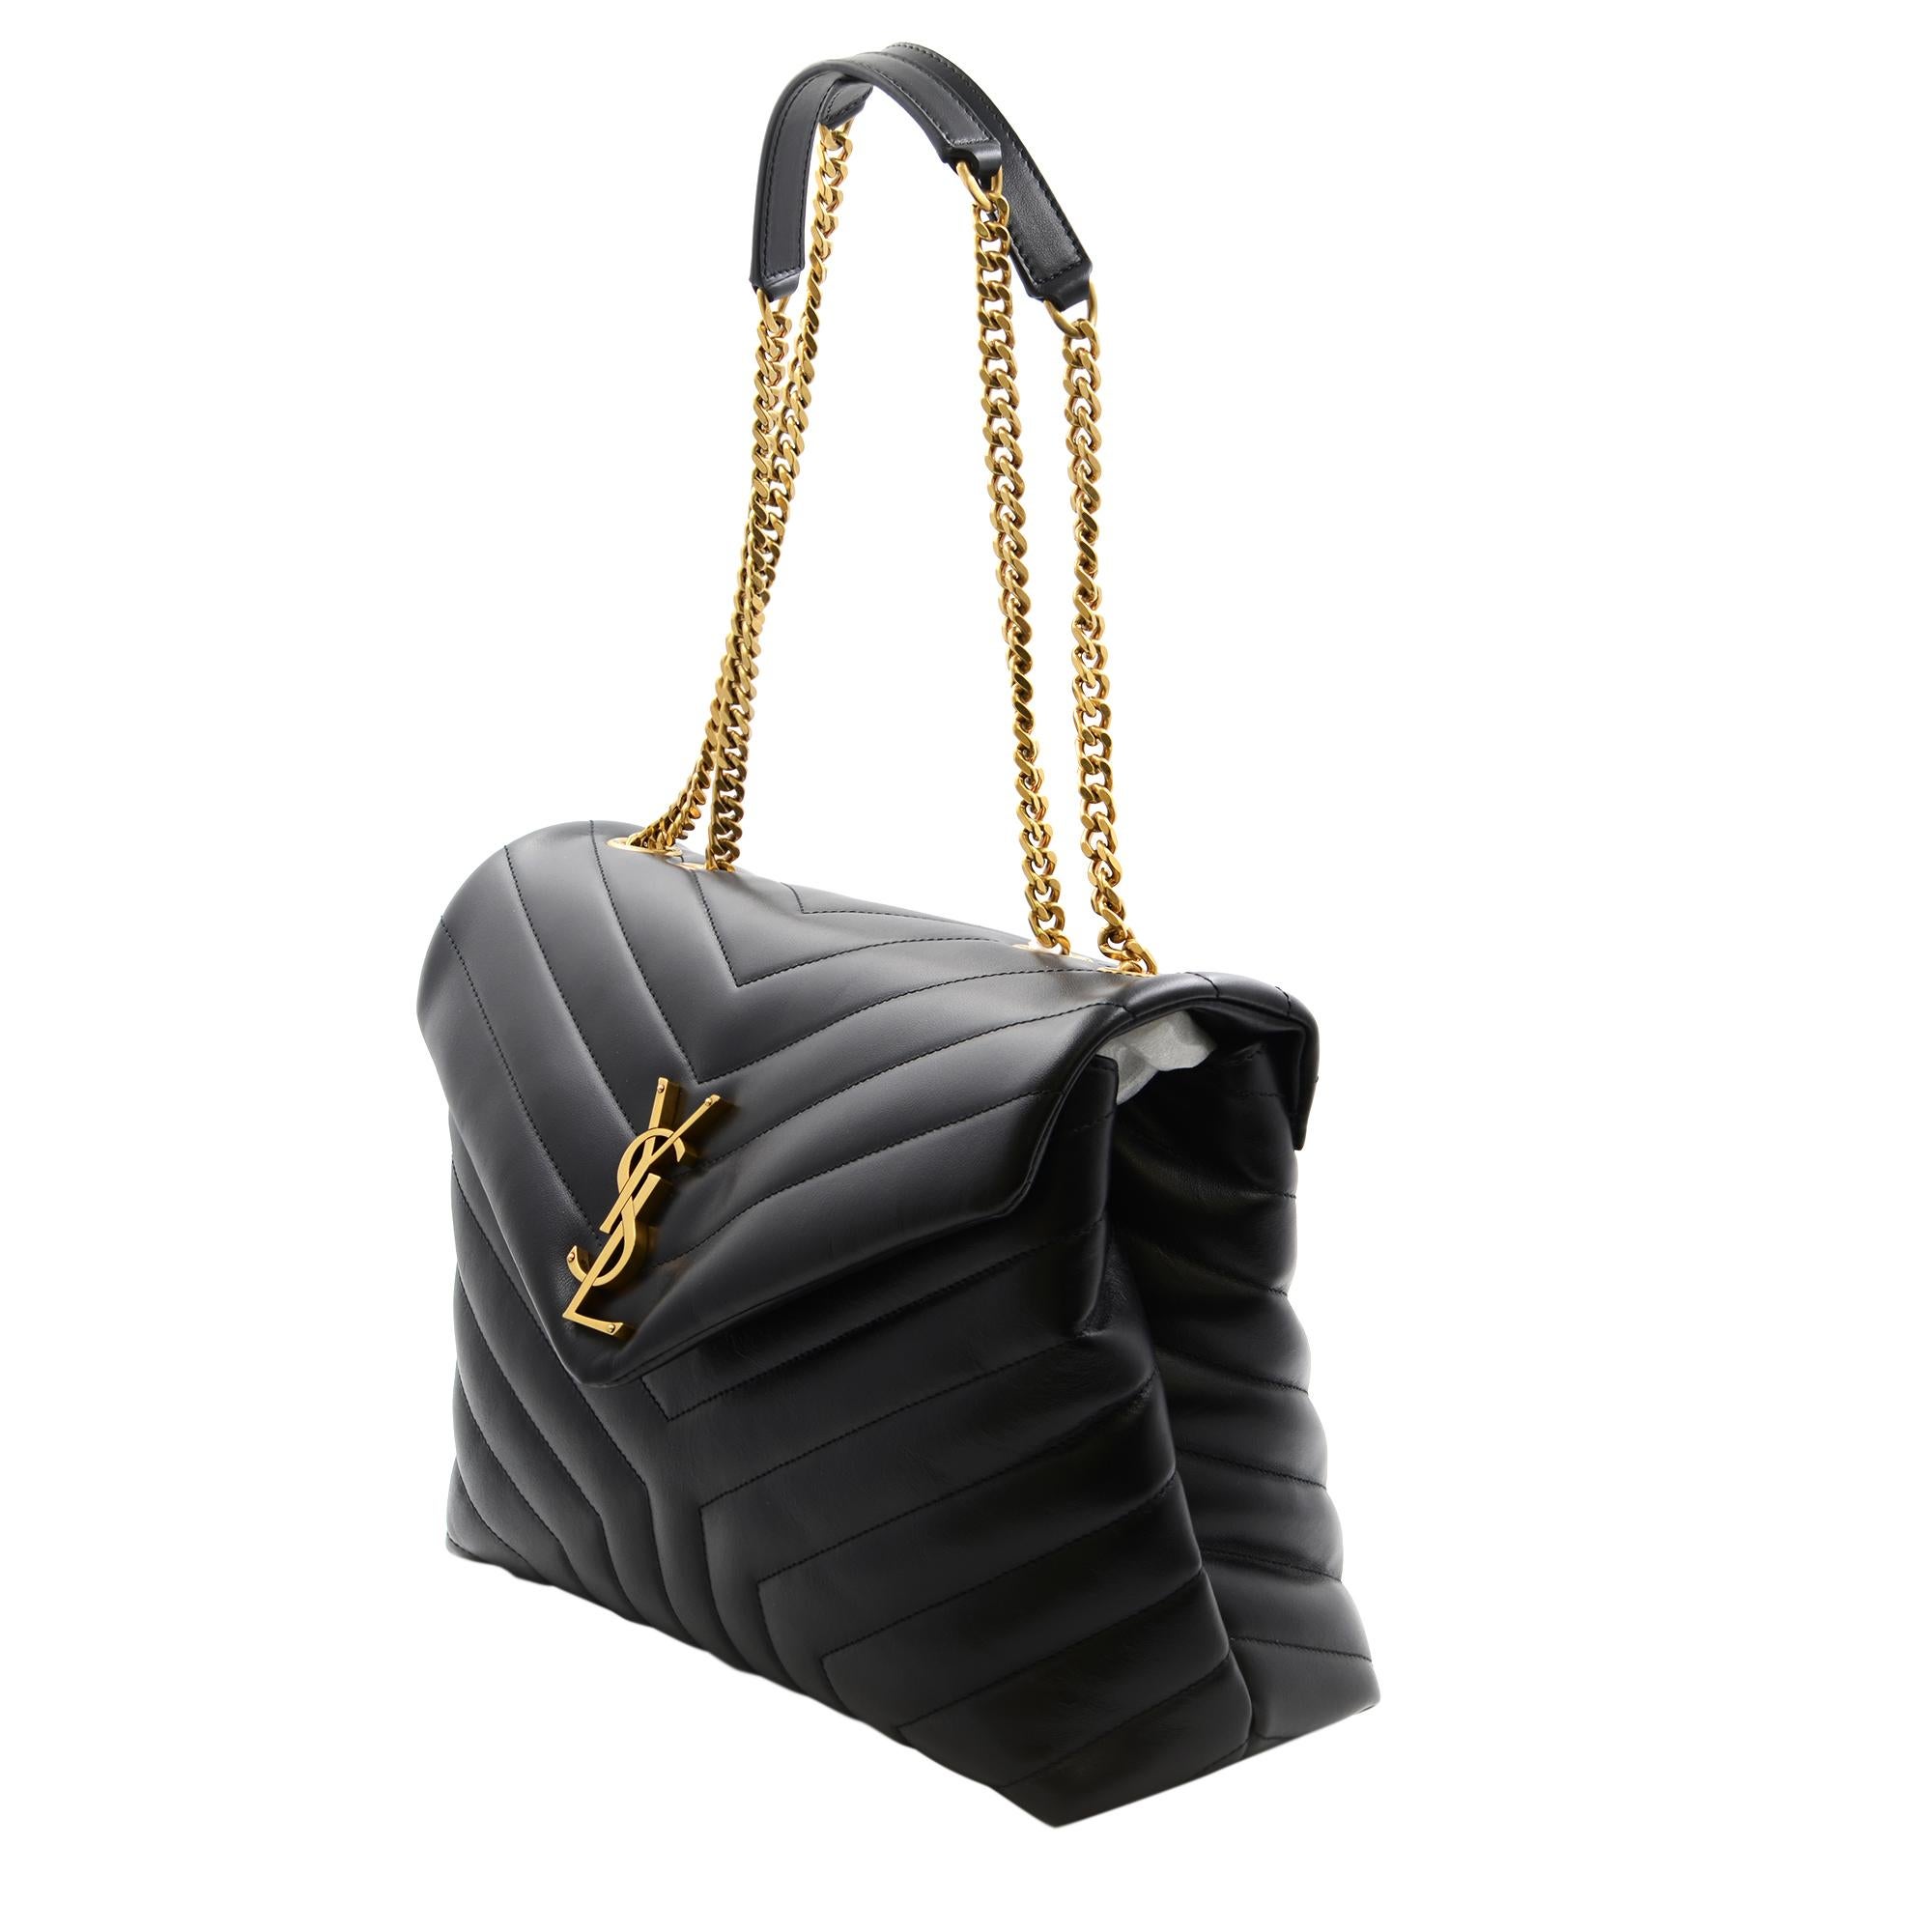 Saint Laurent luxe quilted leather shoulder bag with convertible chain straps. Features, top handle, foldover flap, gold tone hardware, quilted finish leather. Made in Italy. Medium size. Measurements: W 12 inches  x  H 9 inches  x  D 4.5 inches.